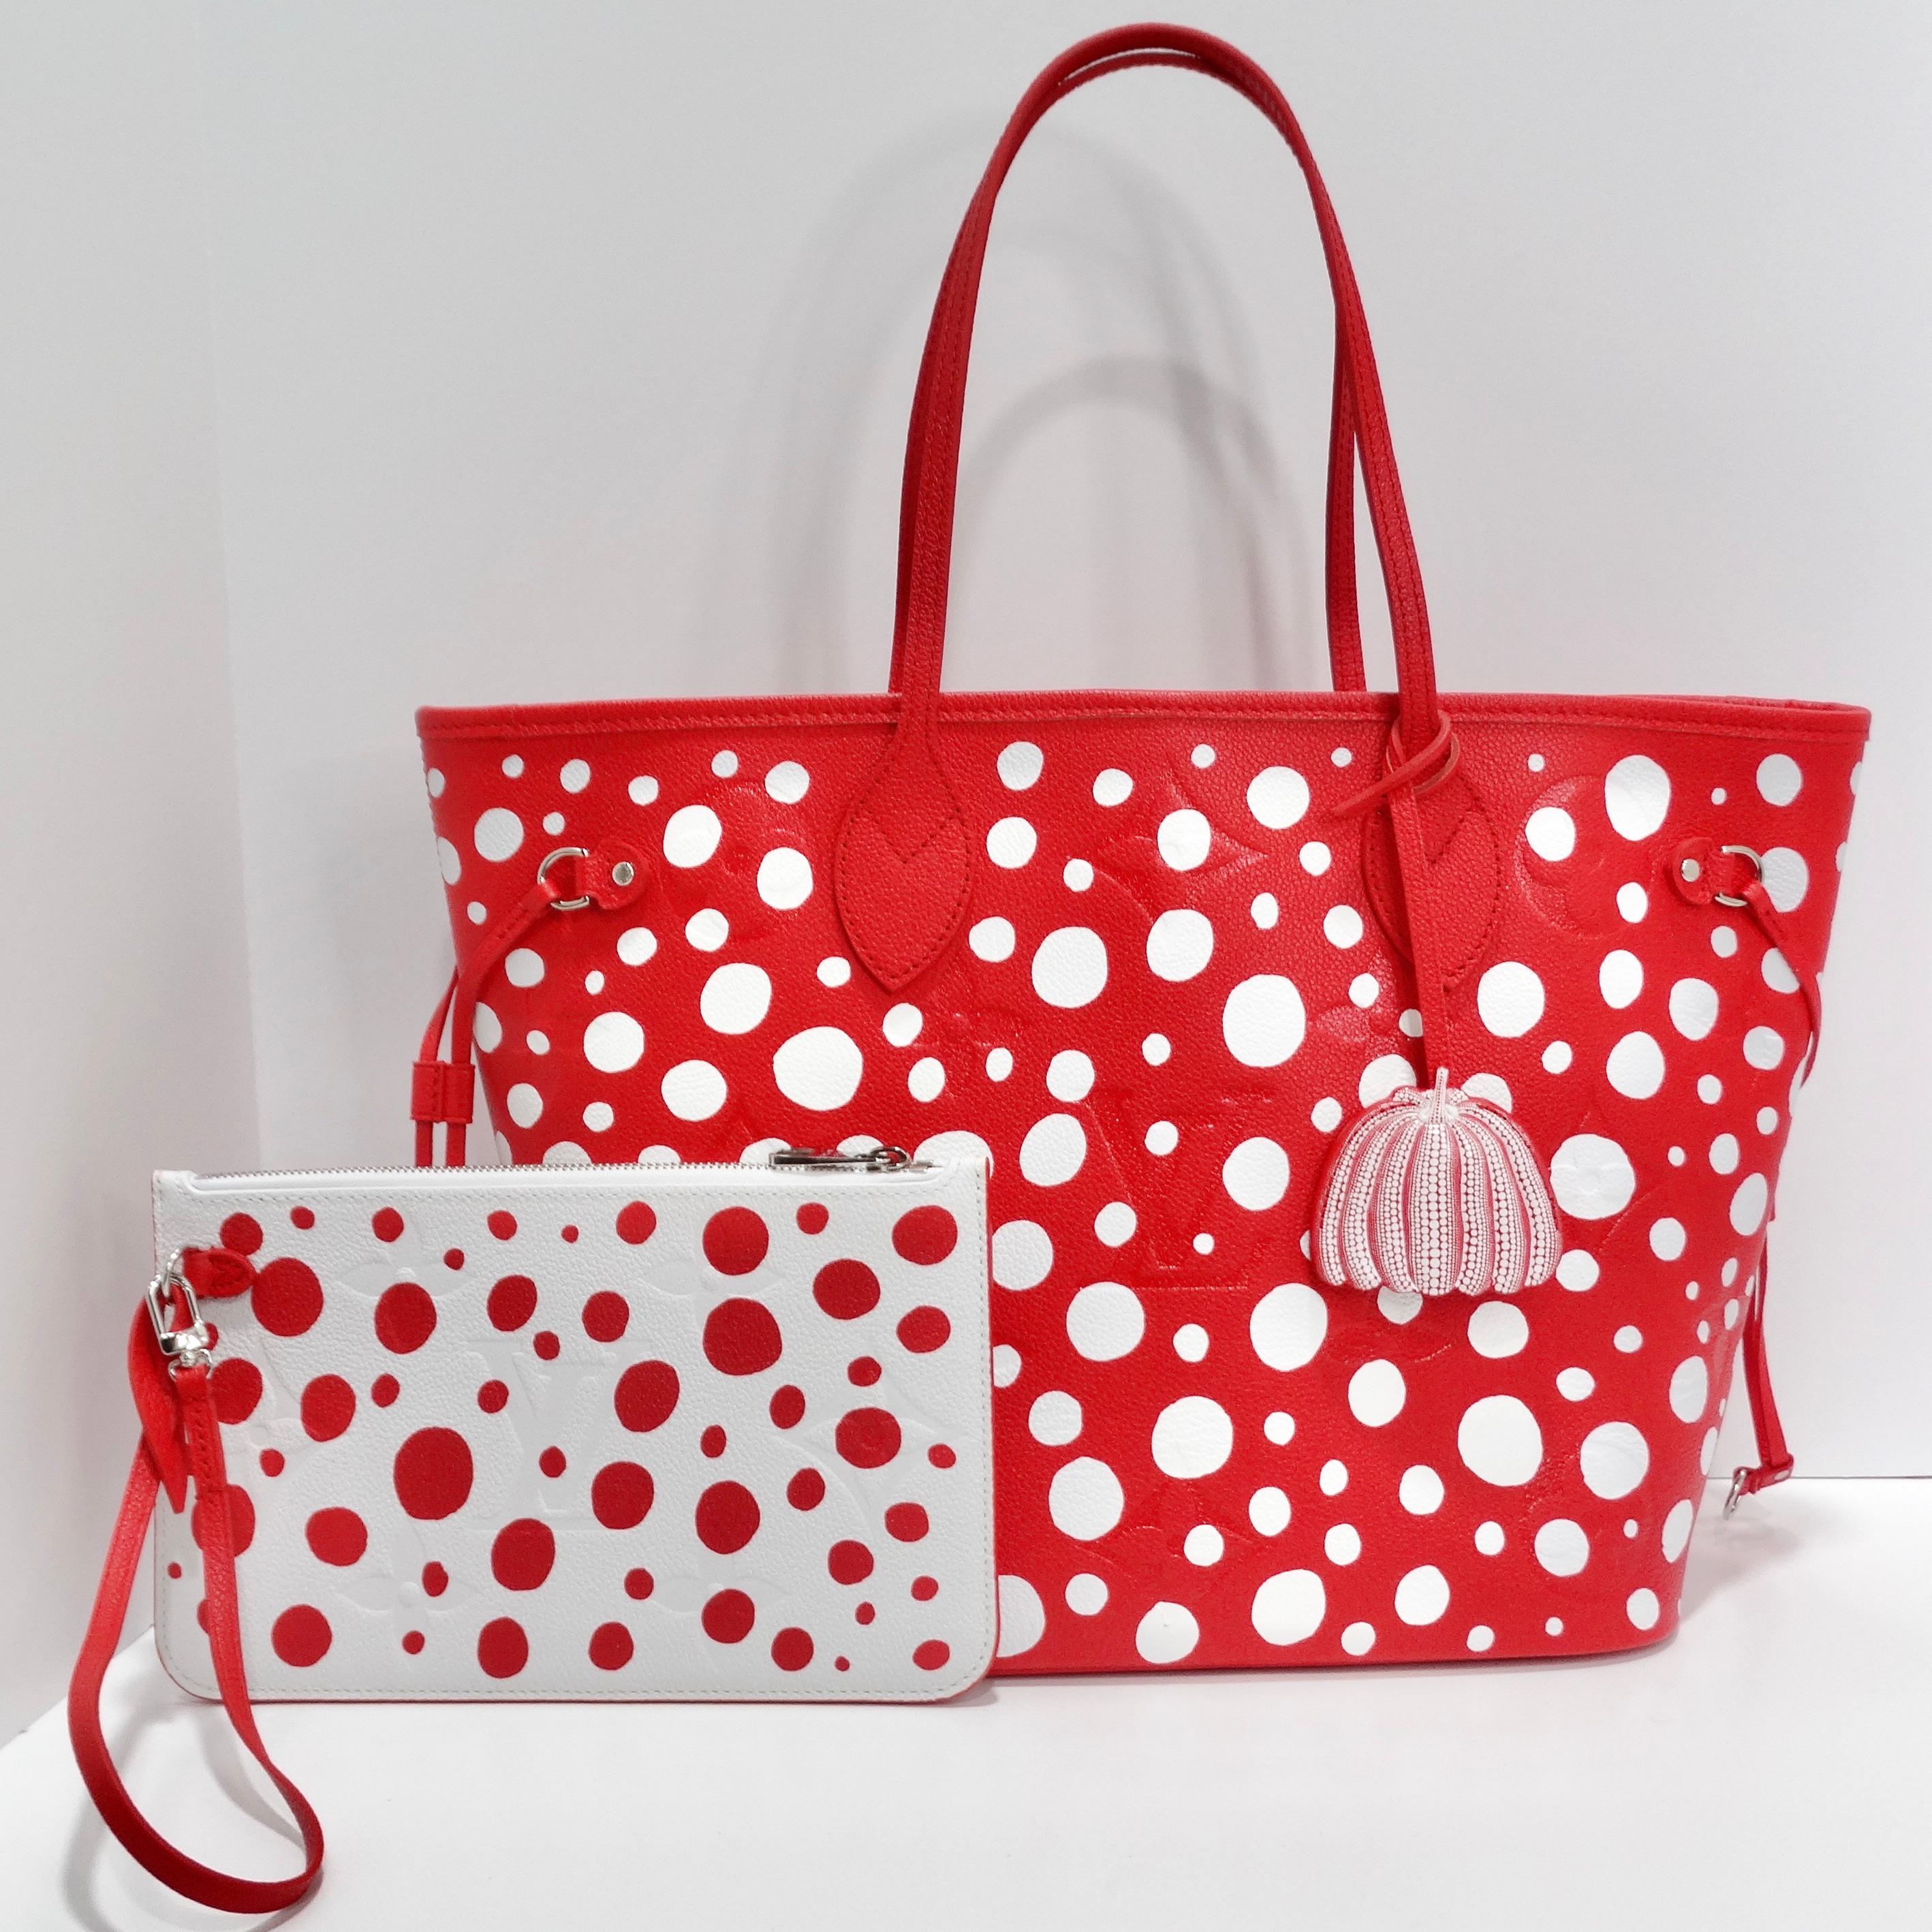 The Louis Vuitton x Yayoi Kusama Neverfull MM Tote Bag is a collaboration between the luxury fashion house Louis Vuitton and the renowned Japanese artist Yayoi Kusama. This tote bag is crafted from classic Louis Vuitton monogram-embossed leather in